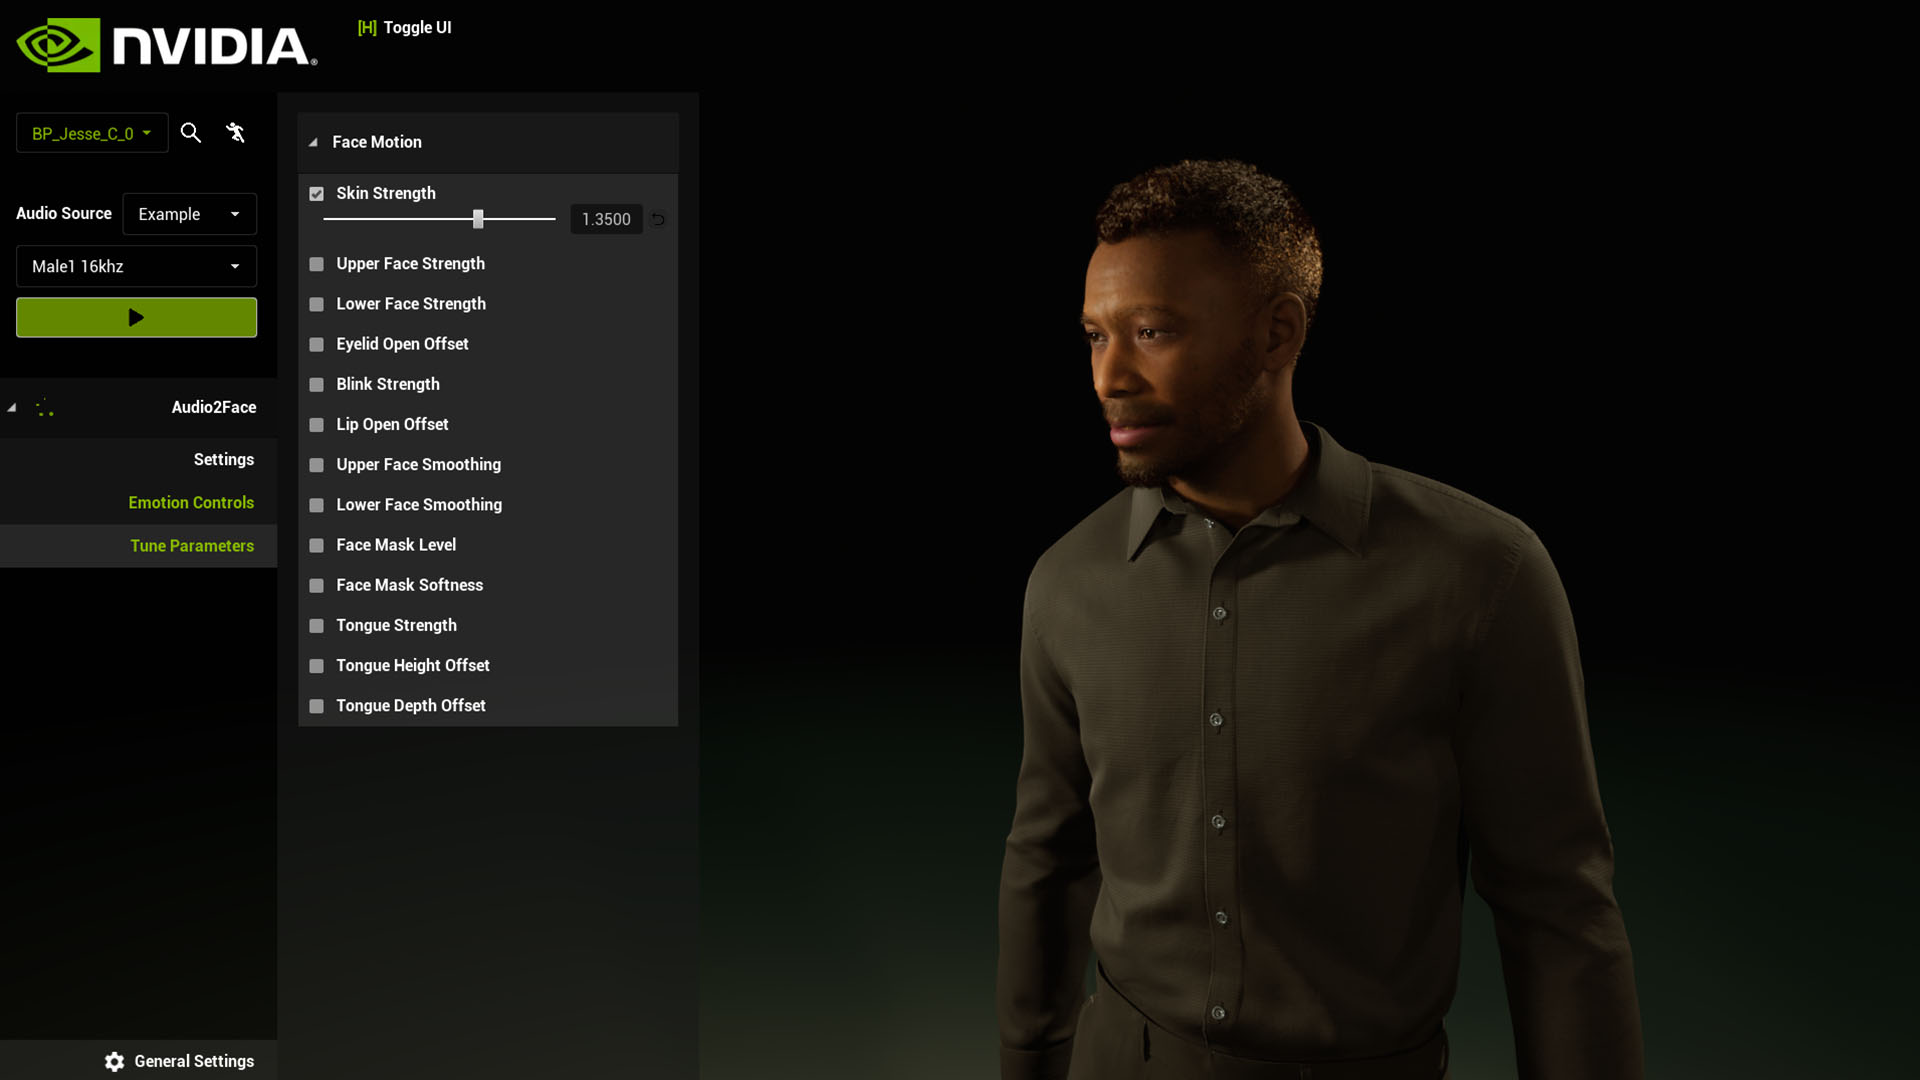 NVIDIA ACE for games sparks life into virtual characters with generative AI